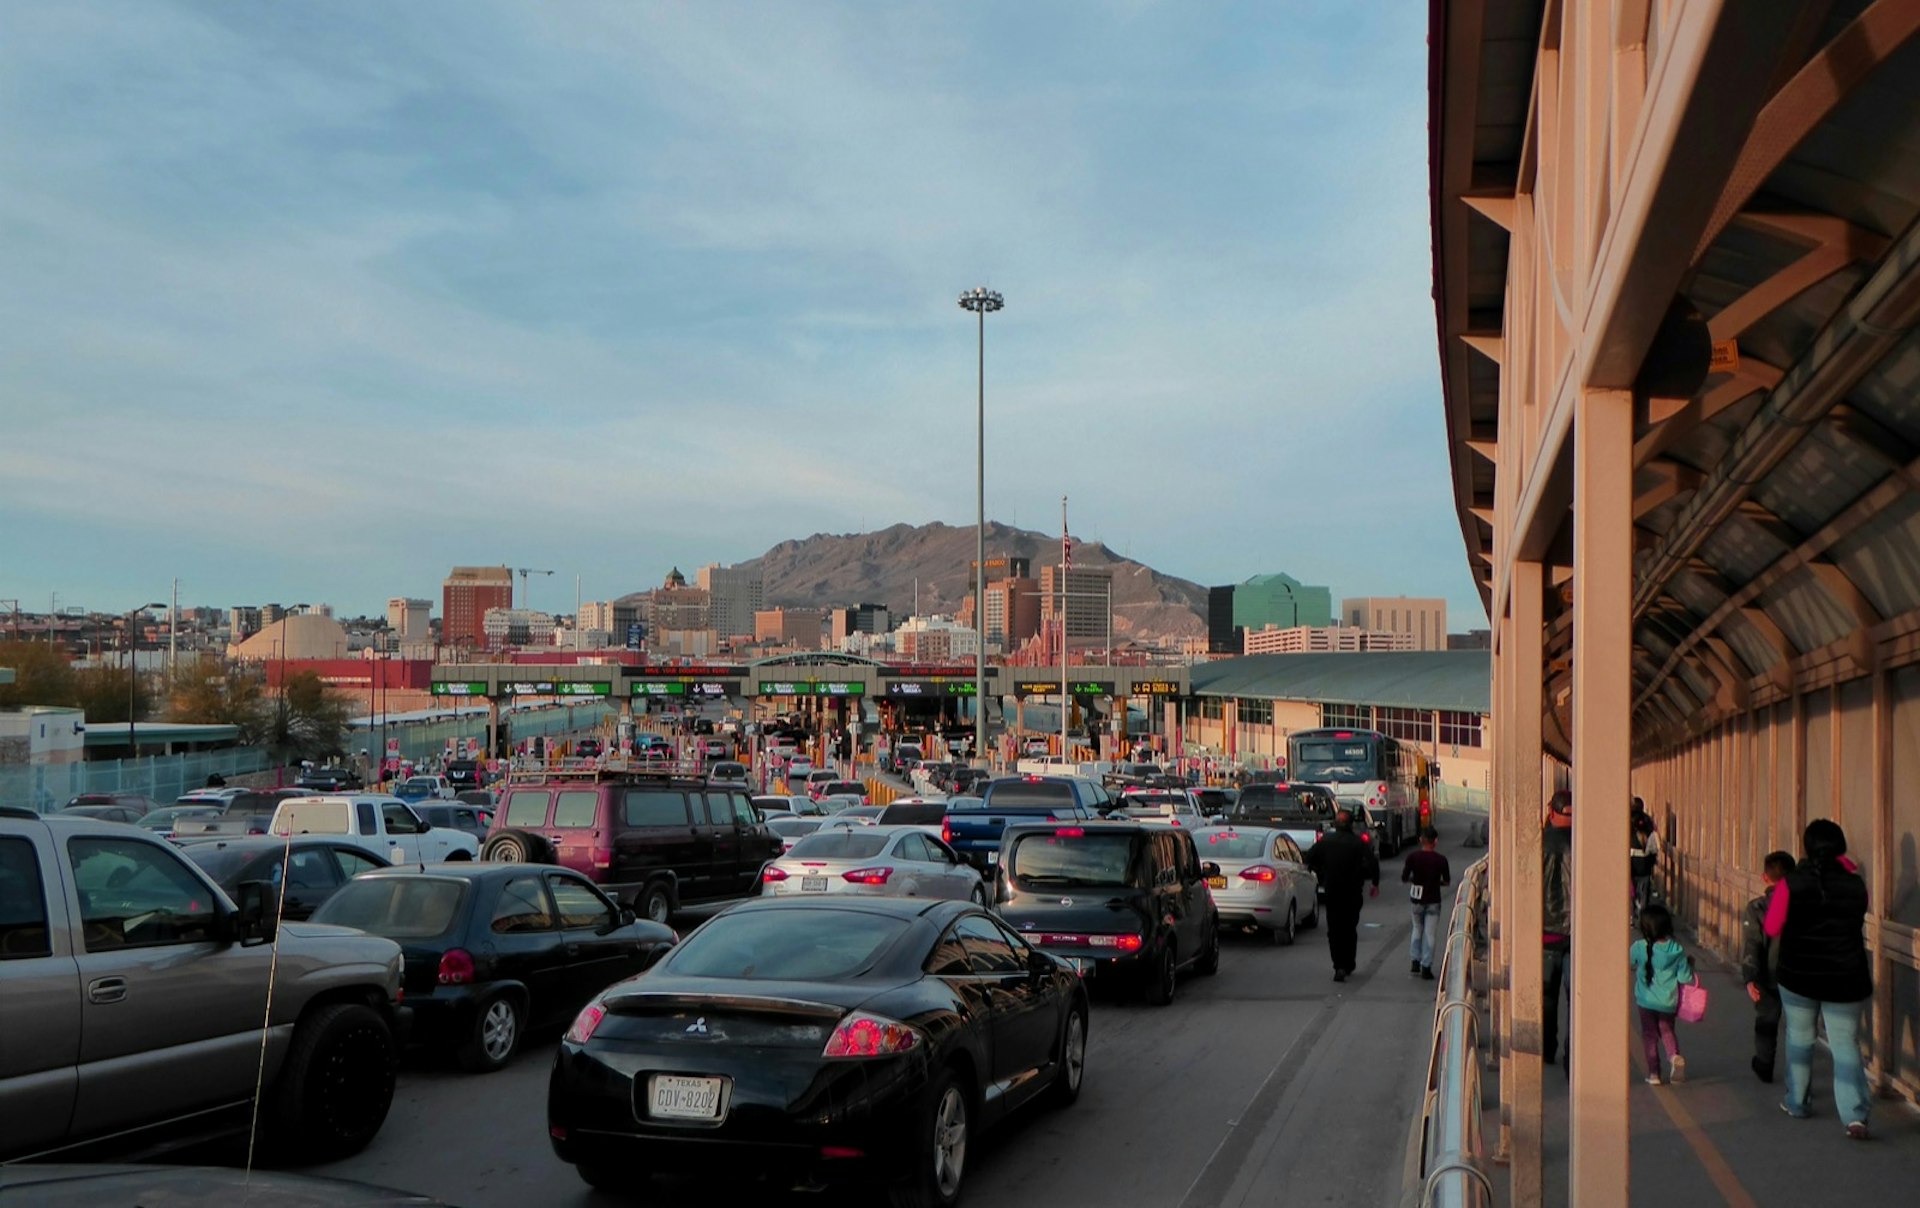 Several lines of cars are immobile as people walk through a port of entry on the US-Mexico border in El Paso, Texas